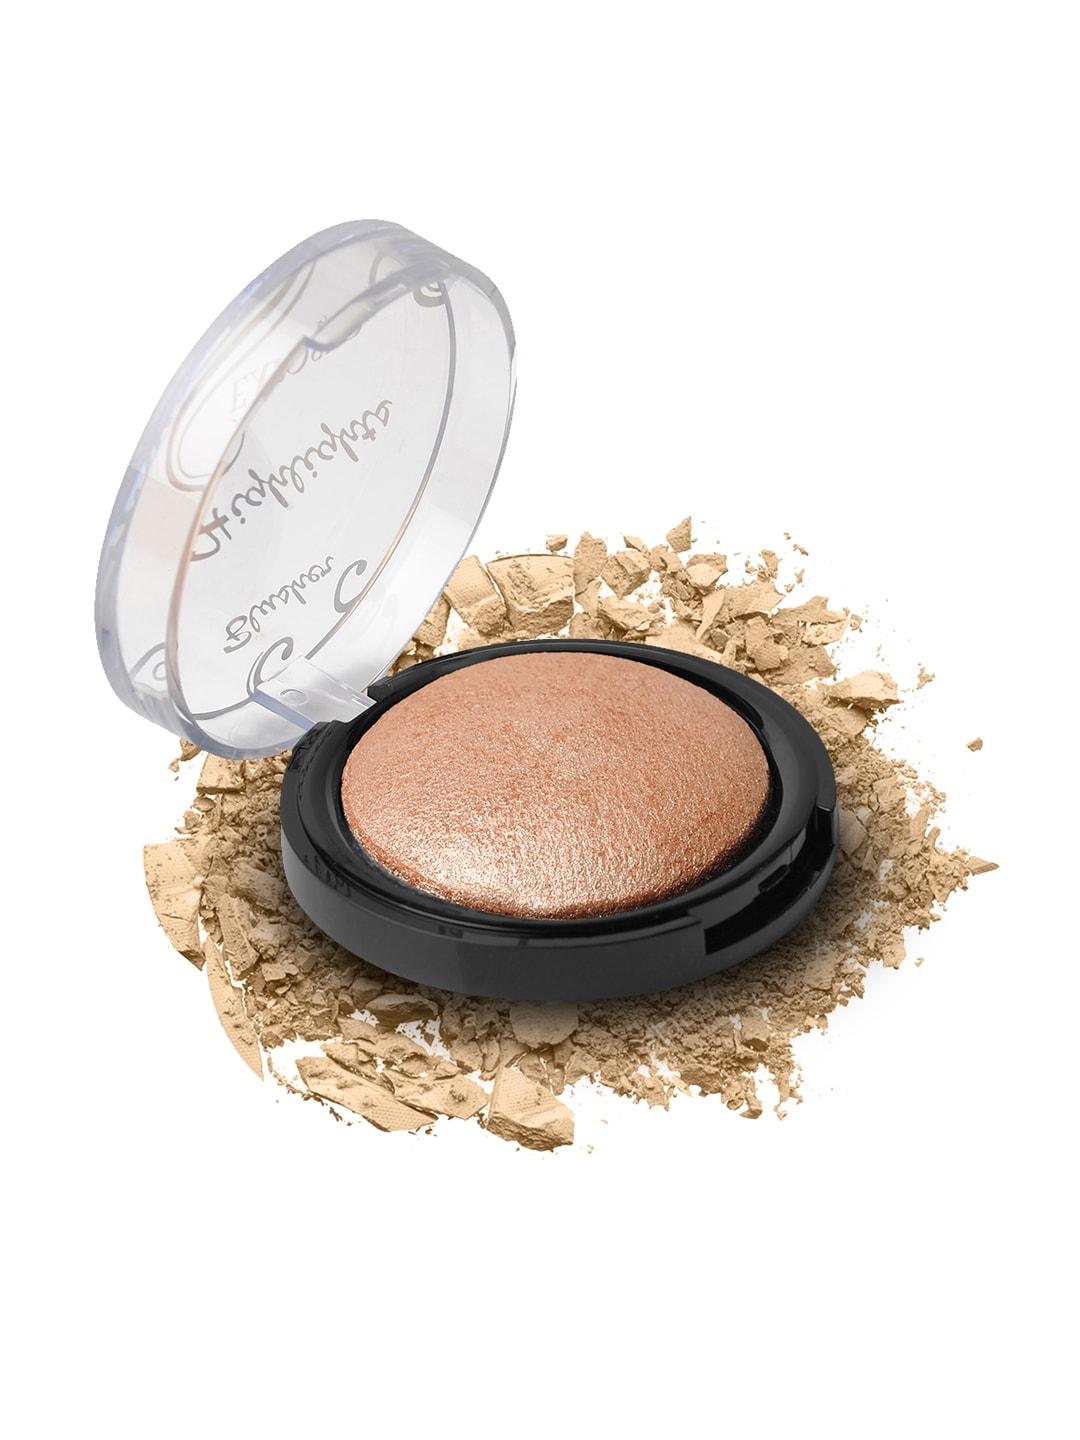 incolor-exposed-highlights-blusher-sunkissed---06-9-g